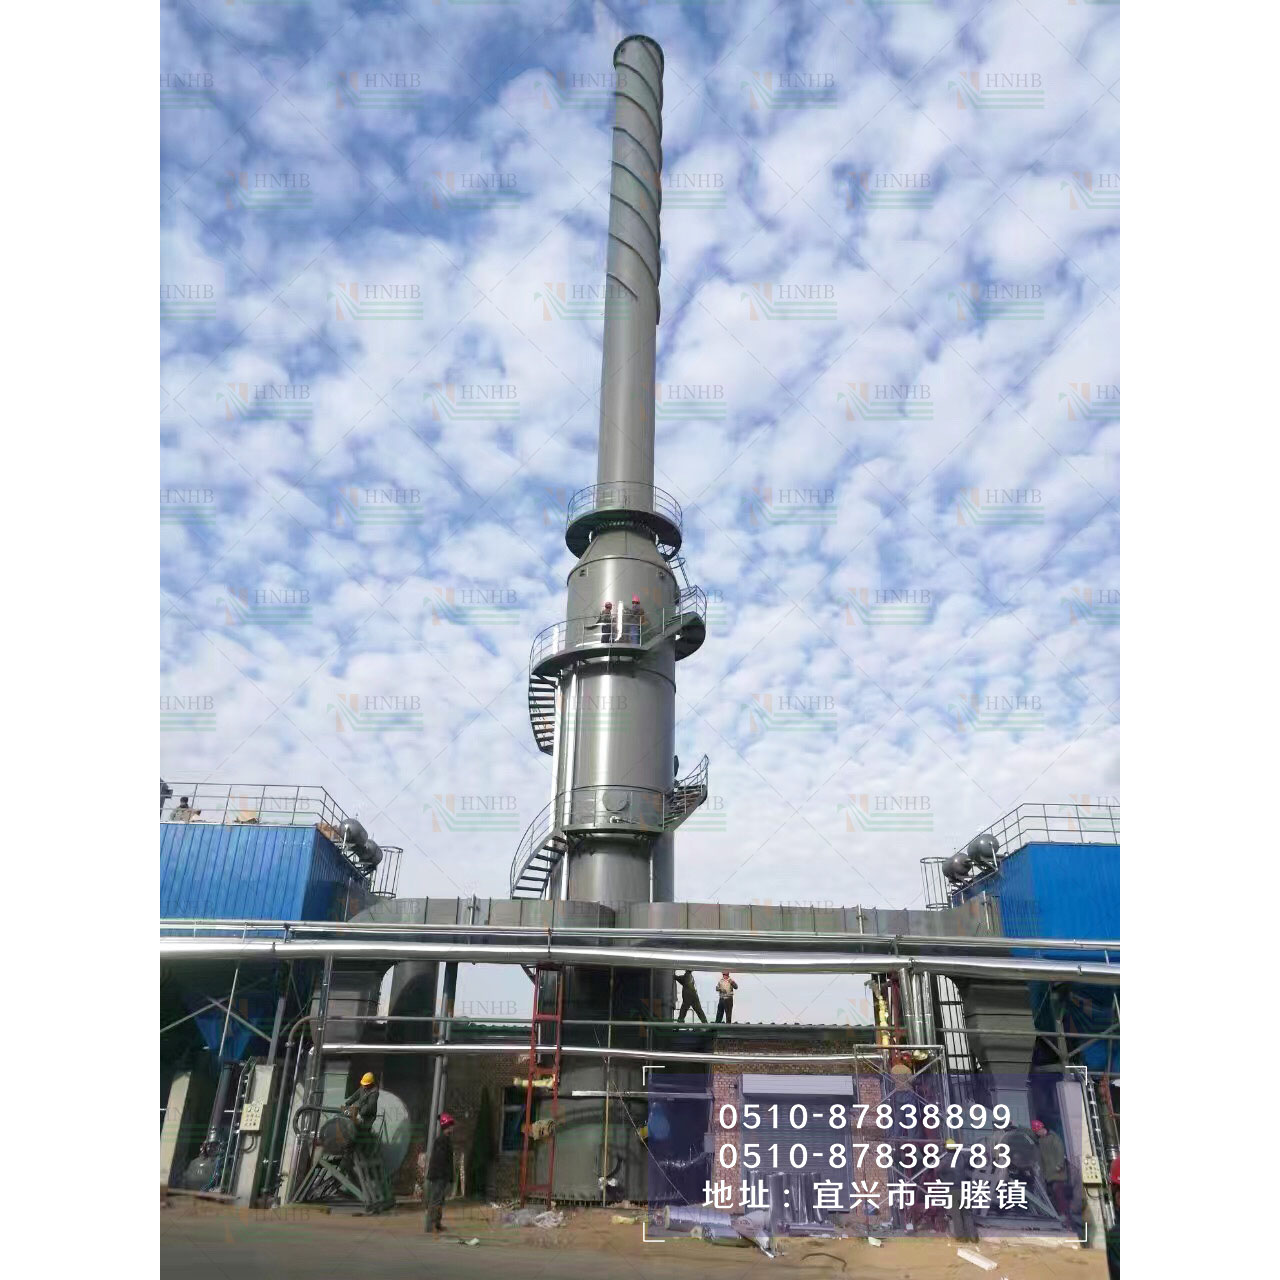 Shanxi-burning coal organic heat carrier boiler dust removal project